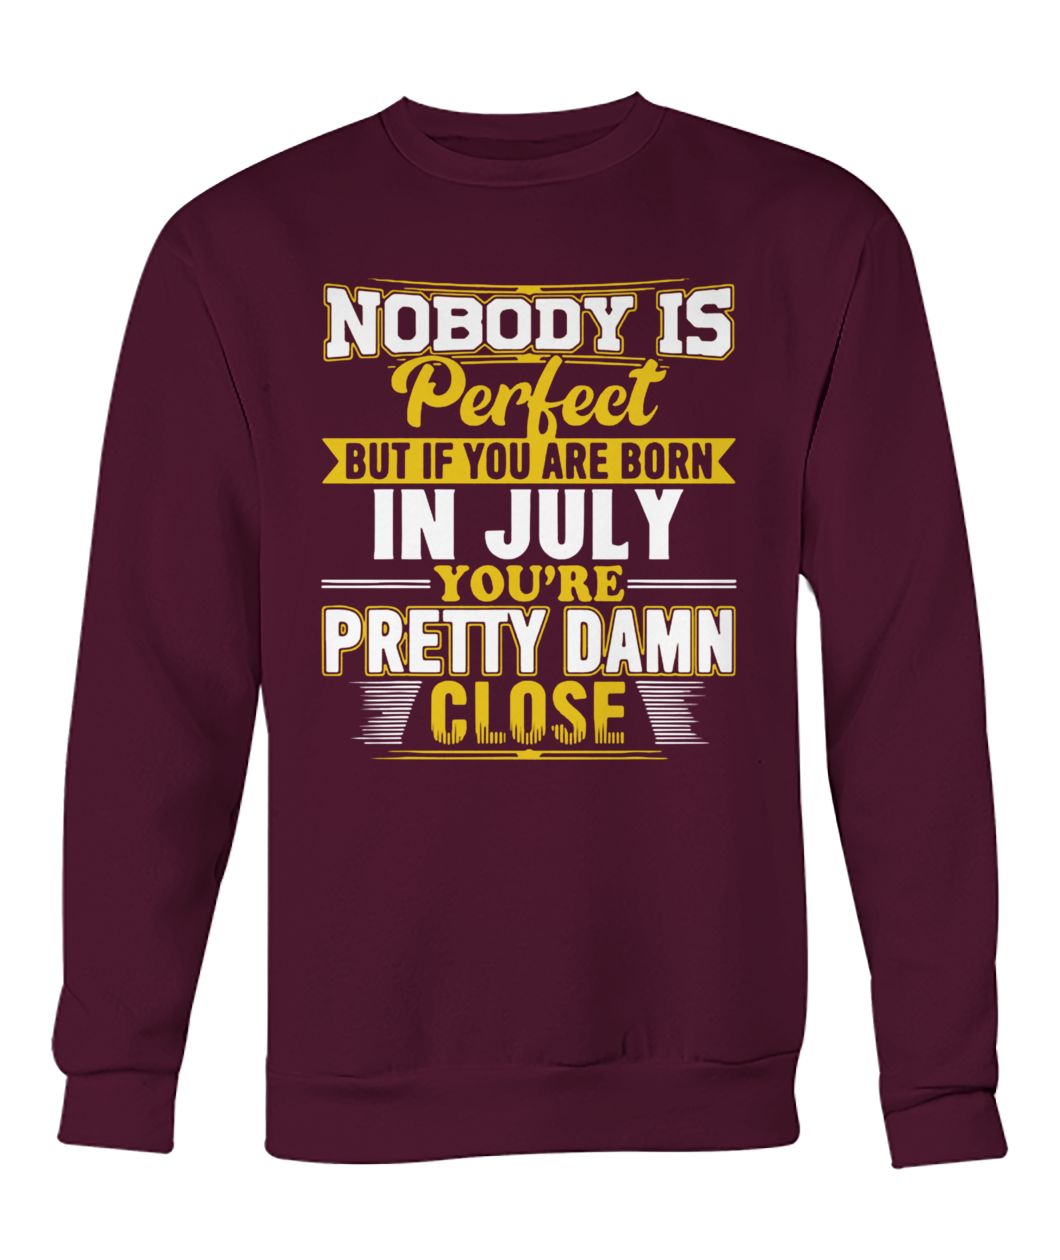 Nobody is perfect but if you are born in July you're pretty damn close crew neck sweatshirt